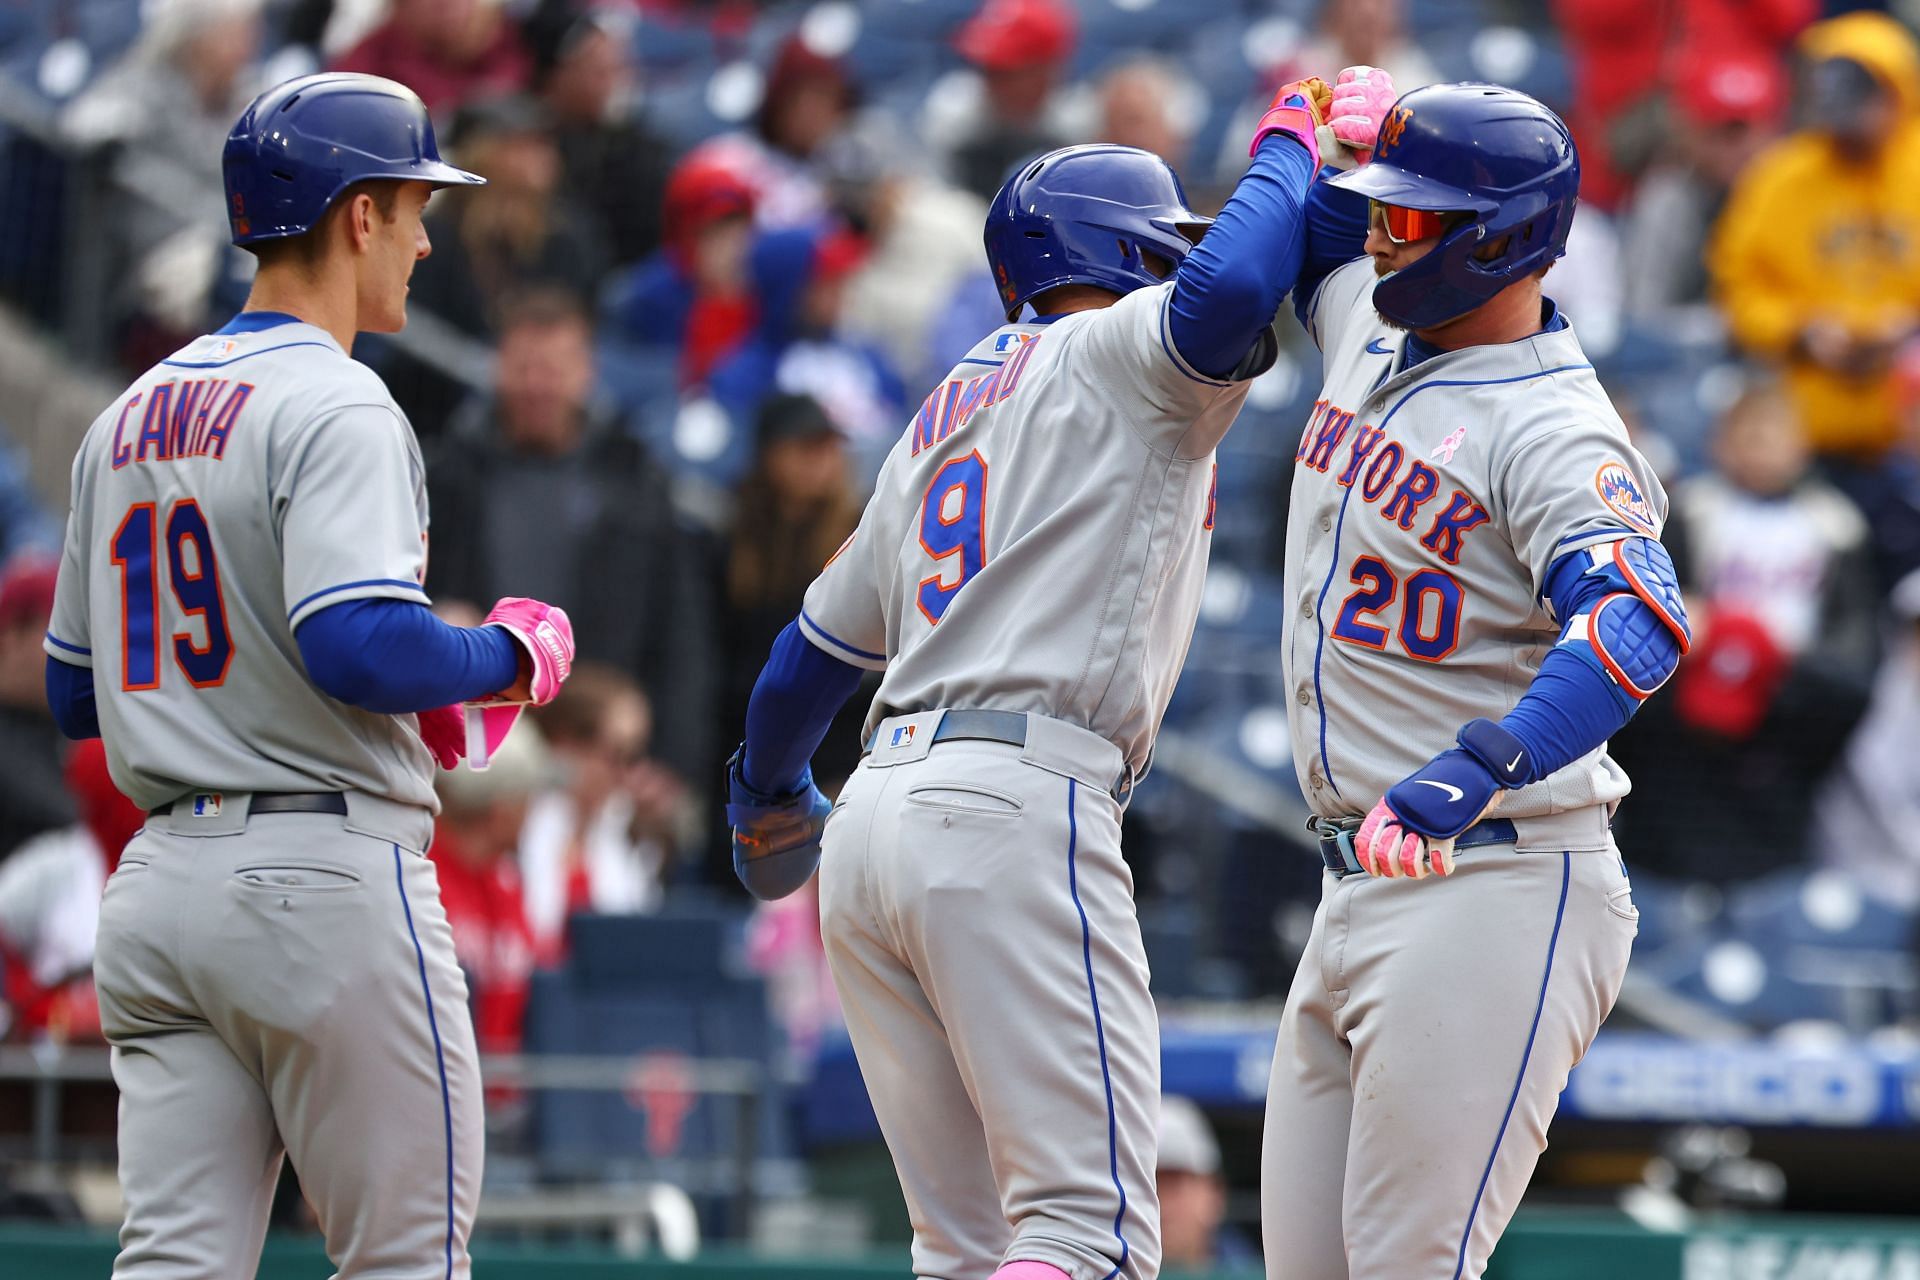 New York Mets First baseman Pete Alonso, the NL RBI leader, was instrumental in giving the Mets their 20th win of the season in Philadelphia yesterday.